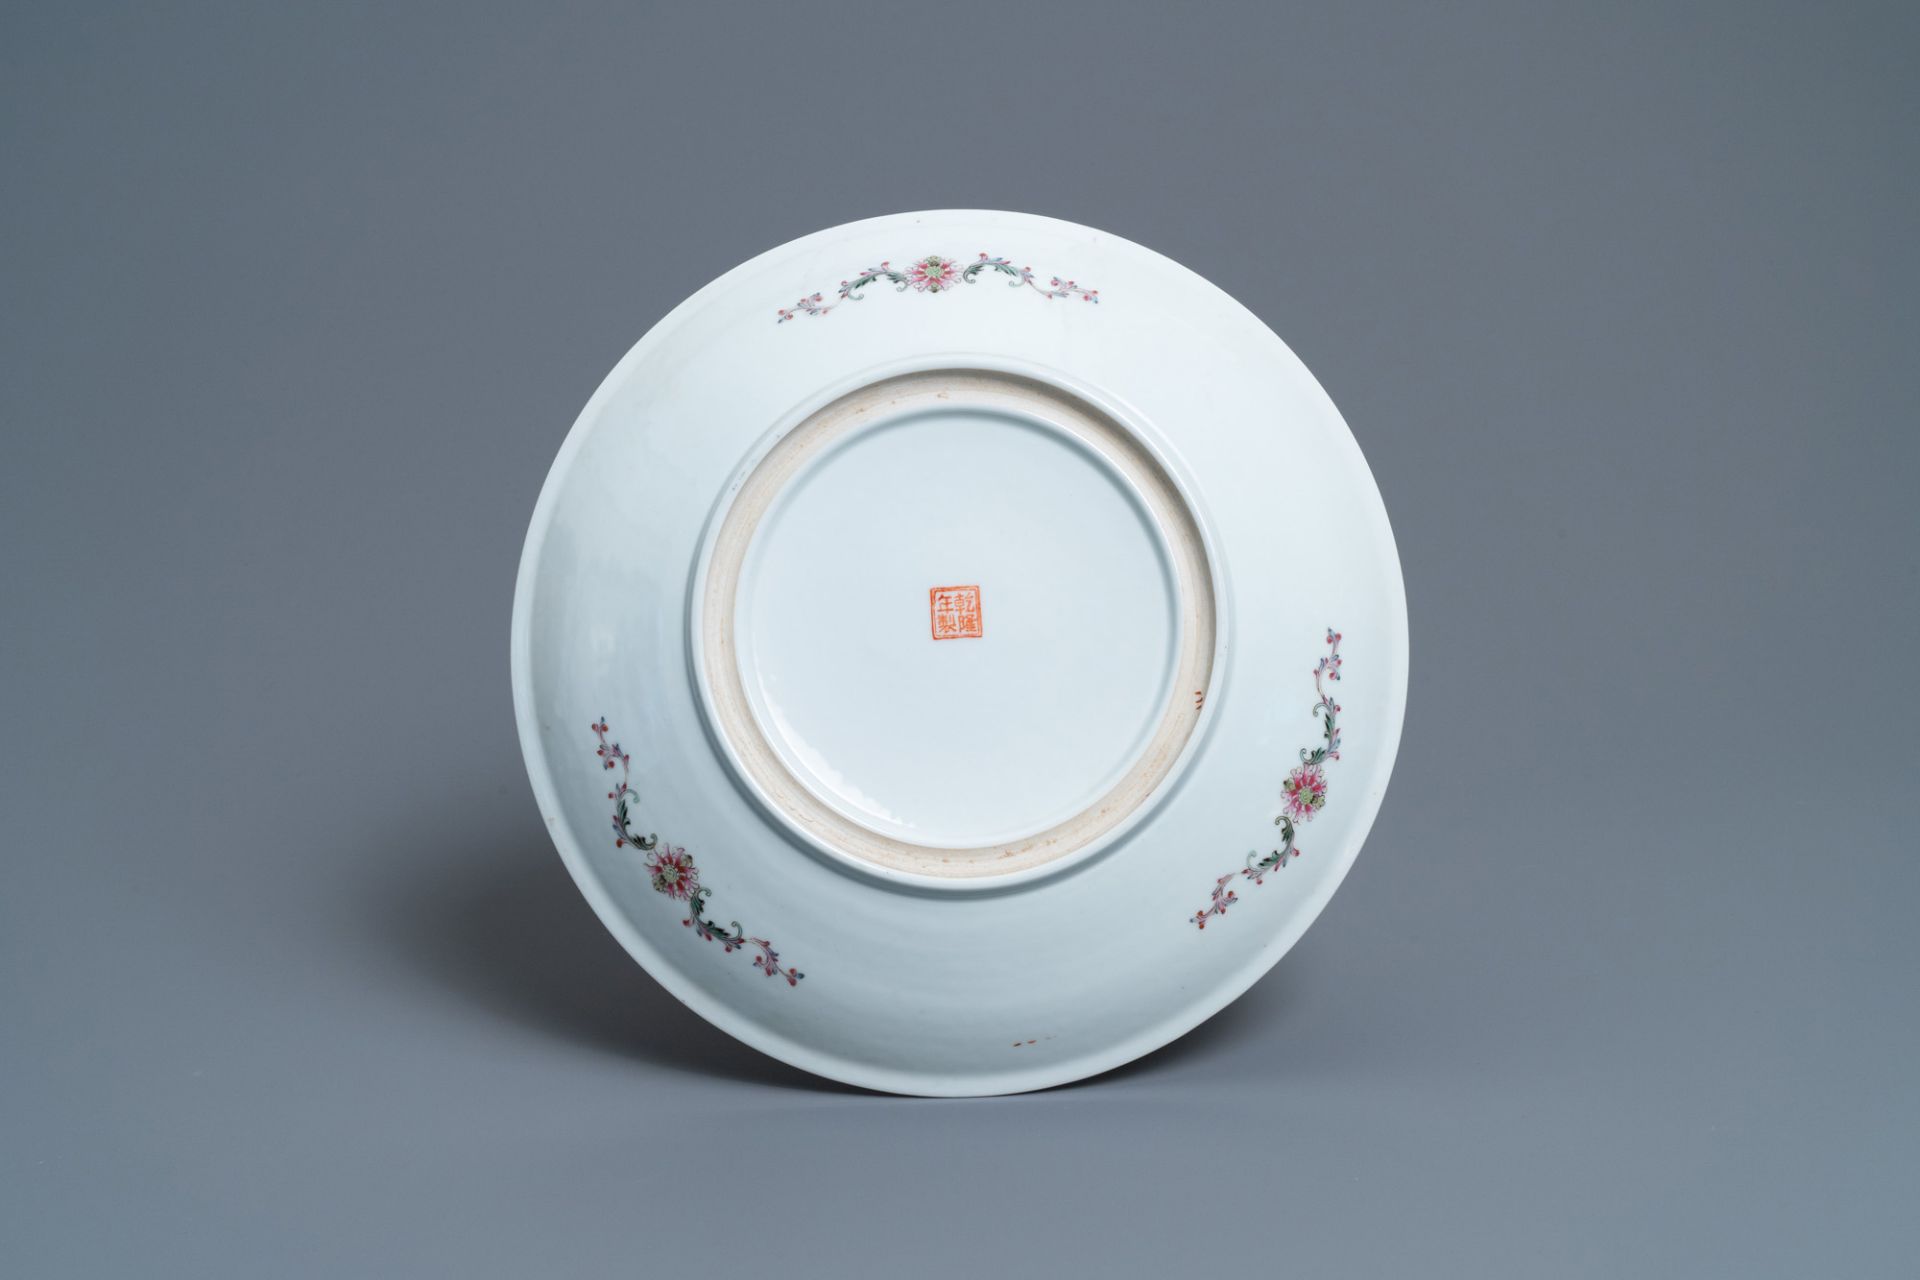 A varied collection of Chinese porcelain, 18/20th C. - Image 3 of 11